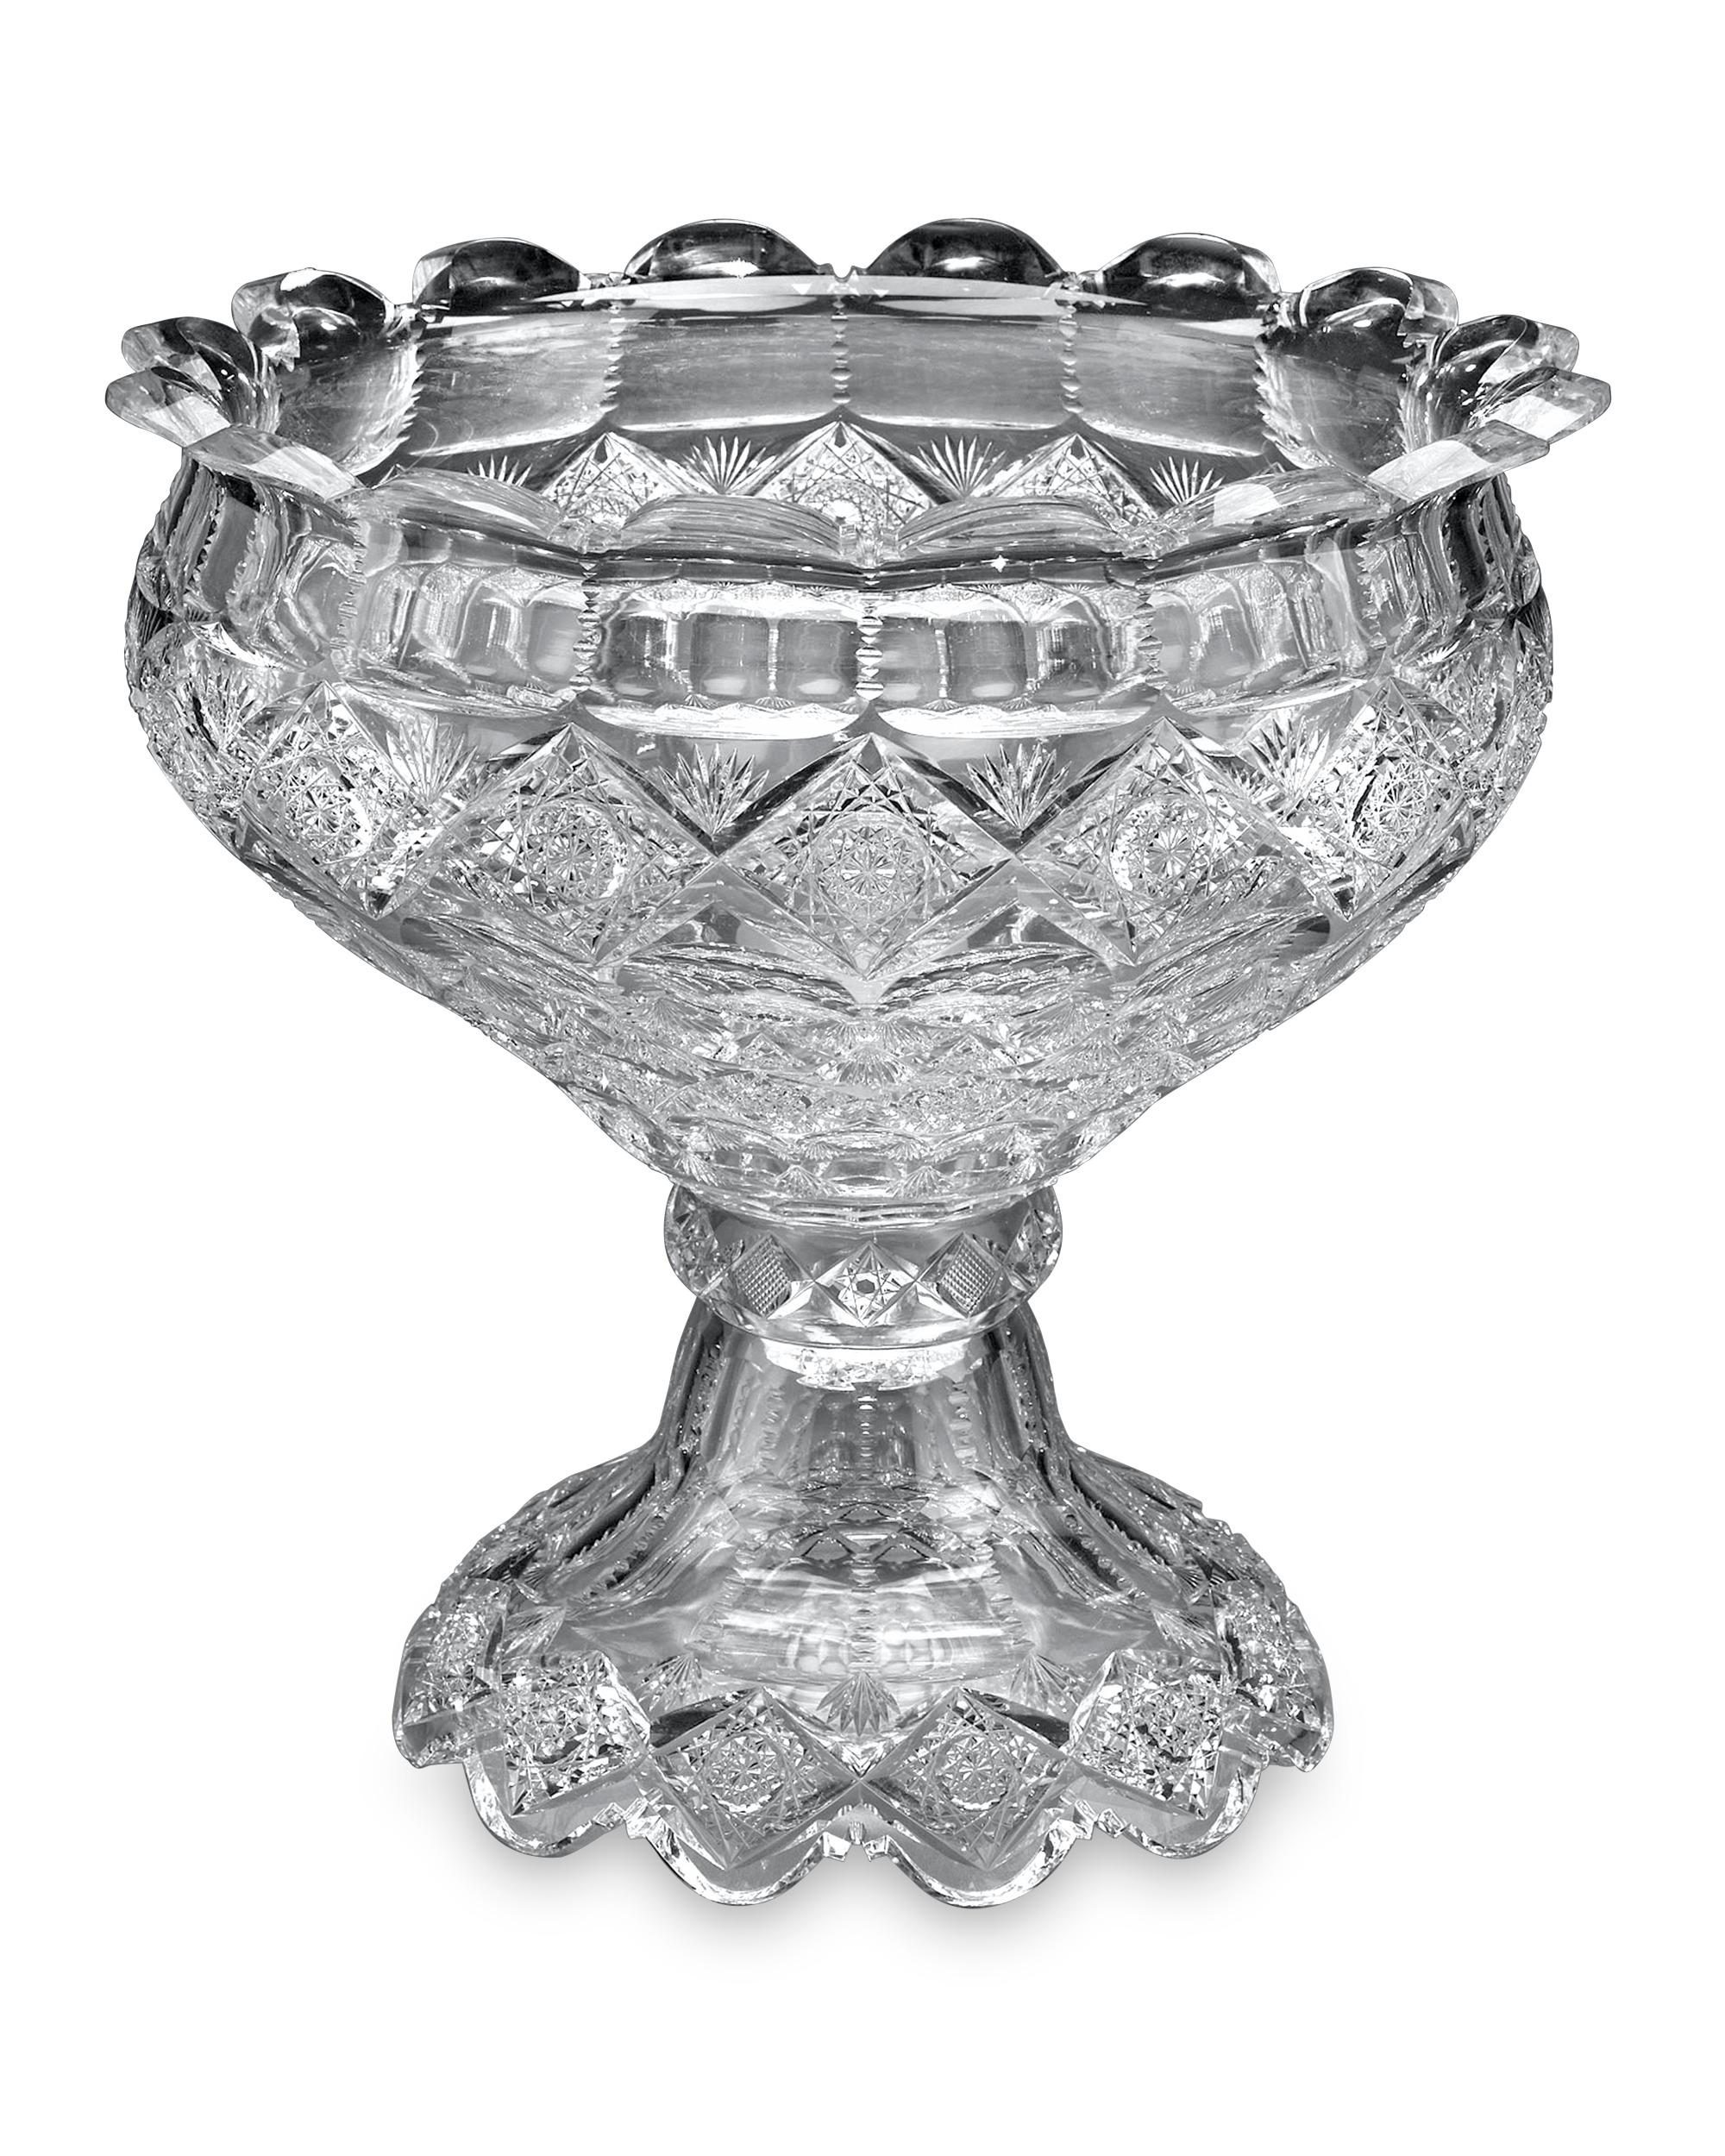 This remarkable cut glass punch bowl by Sinclaire is cut in the rare Brussels pattern. This absolutely stunning pattern is one of the company's scarcest, and this remarkable bowl stands among Sinclaire's finest works. A field of twinkling hobstars